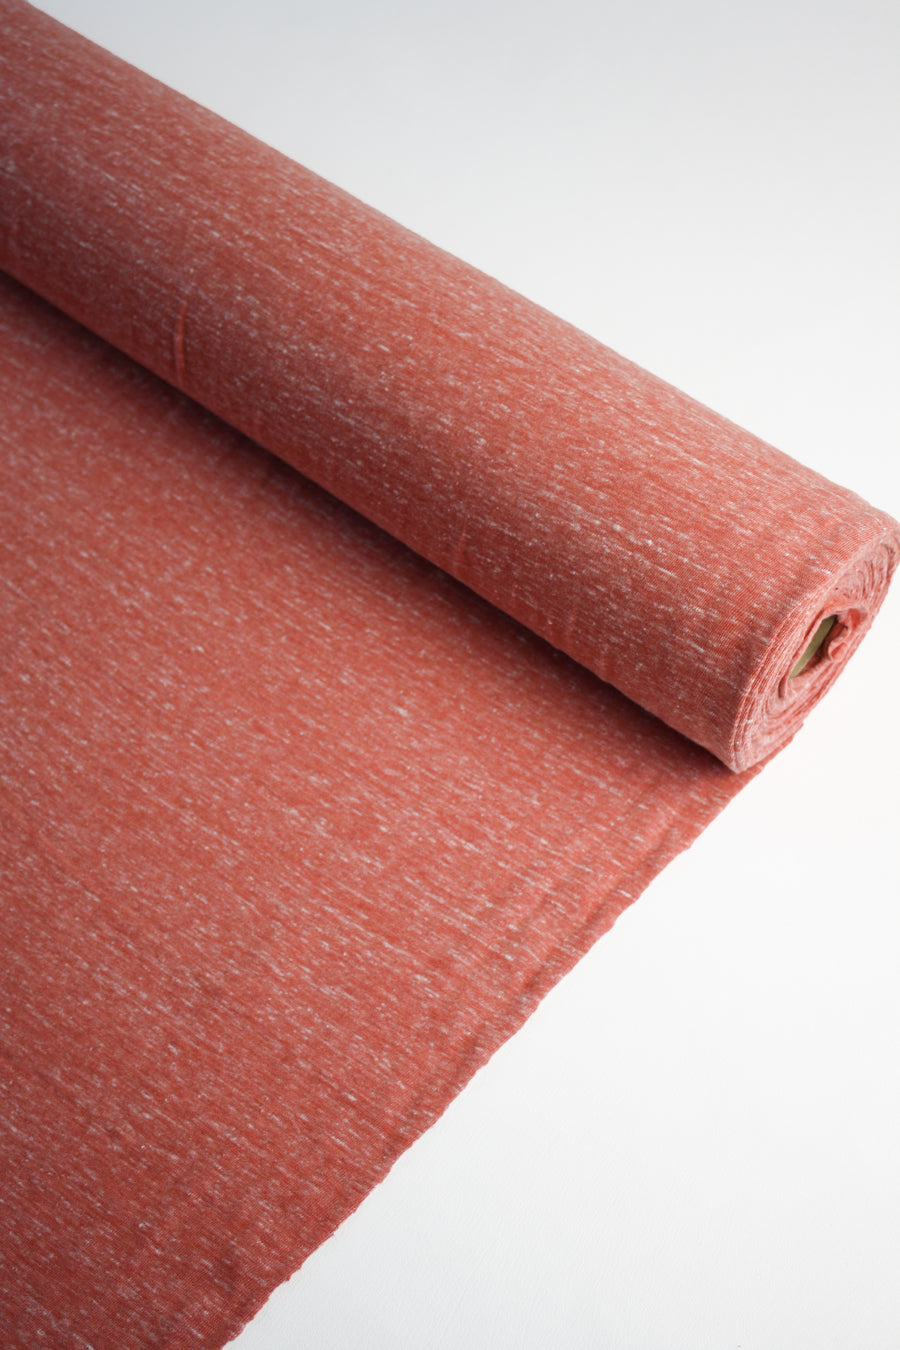 Kobe - Recycled Cotton Jersey | Pomodoro Red Marle #6